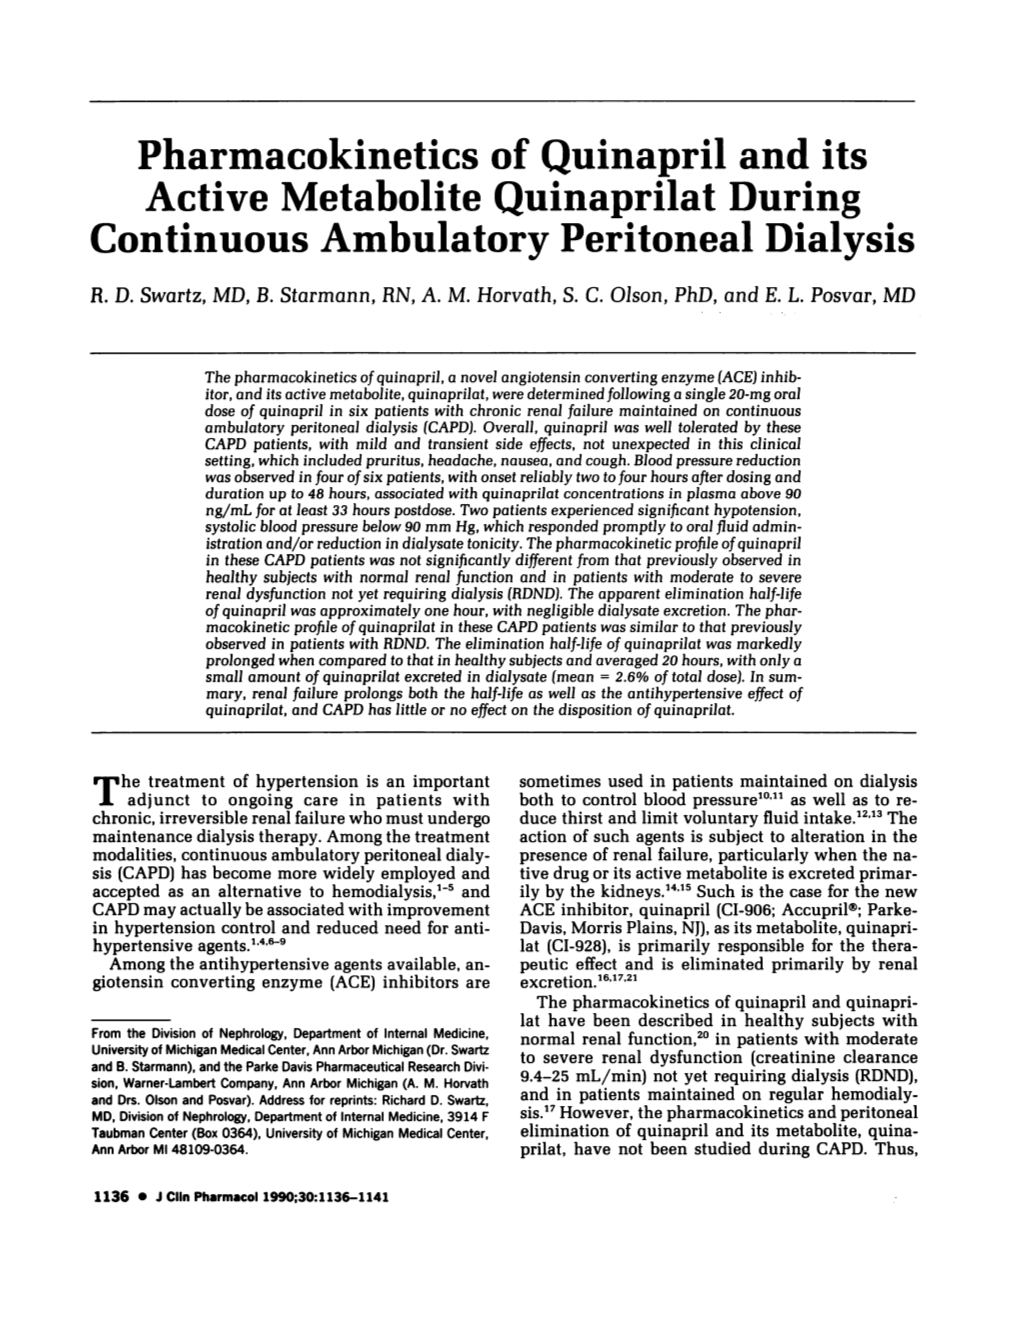 Pharmacokinetics of Quinapril and Its Active Metabolite Quinaprilat During Continuous Ambulatory Peritoneal Dialysis